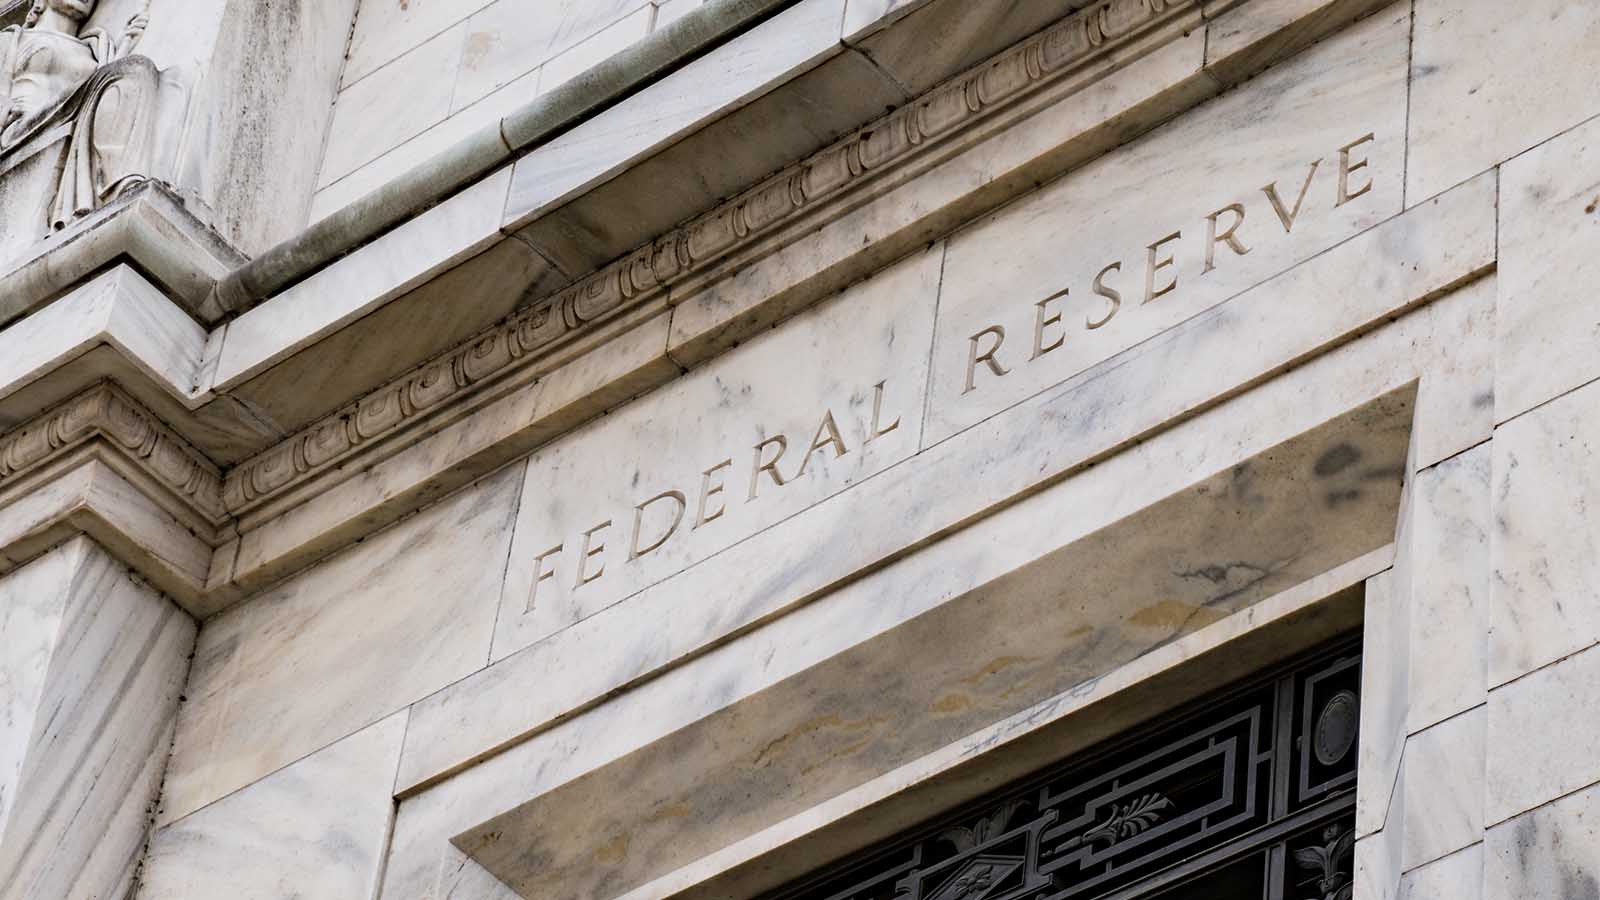 A detail shot of the Federal Reserve building.